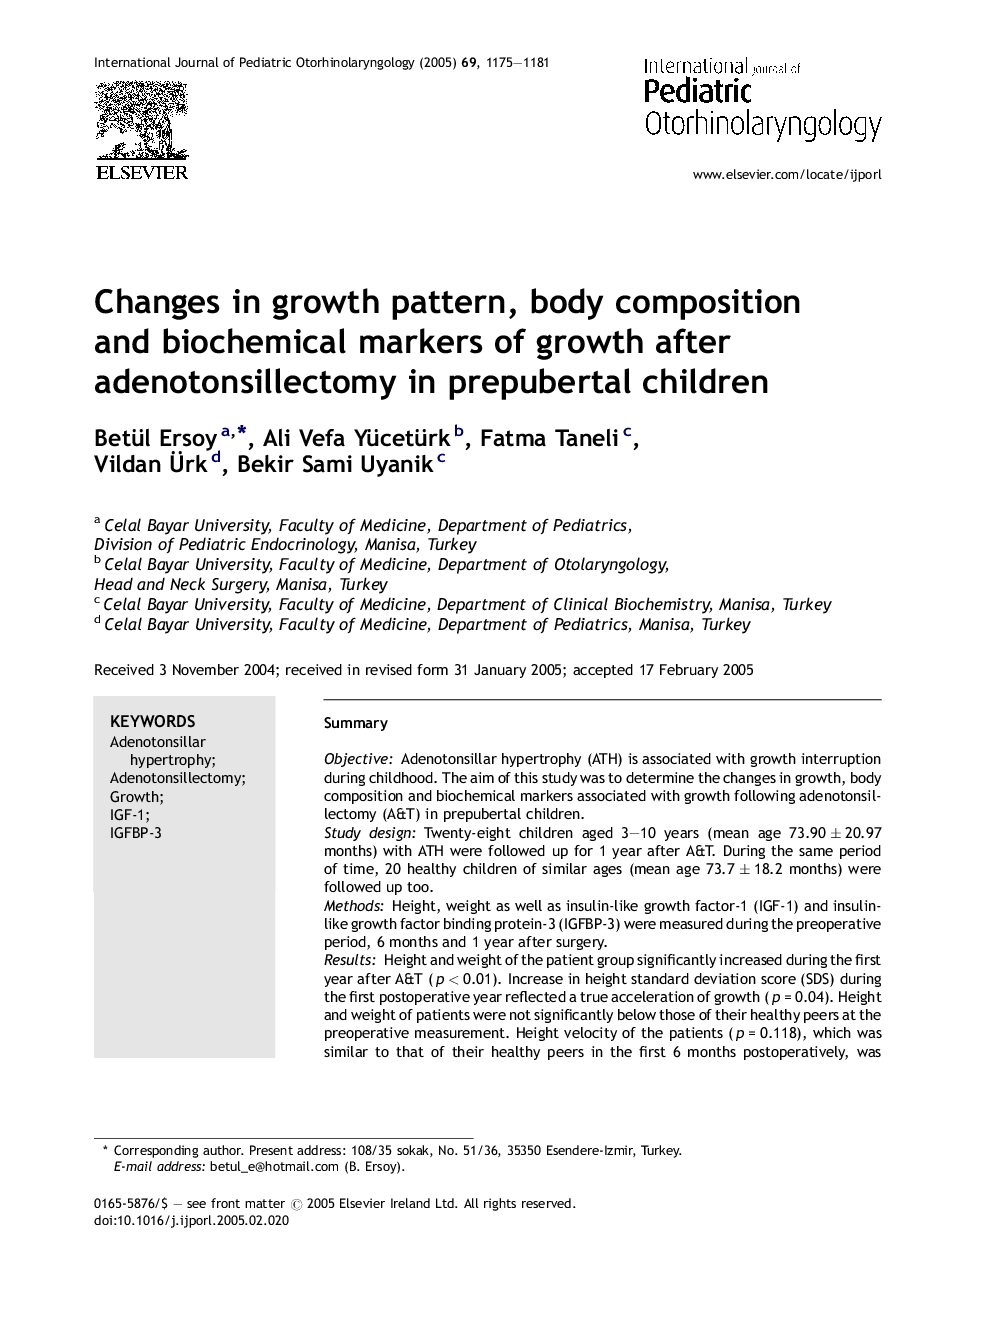 Changes in growth pattern, body composition and biochemical markers of growth after adenotonsillectomy in prepubertal children